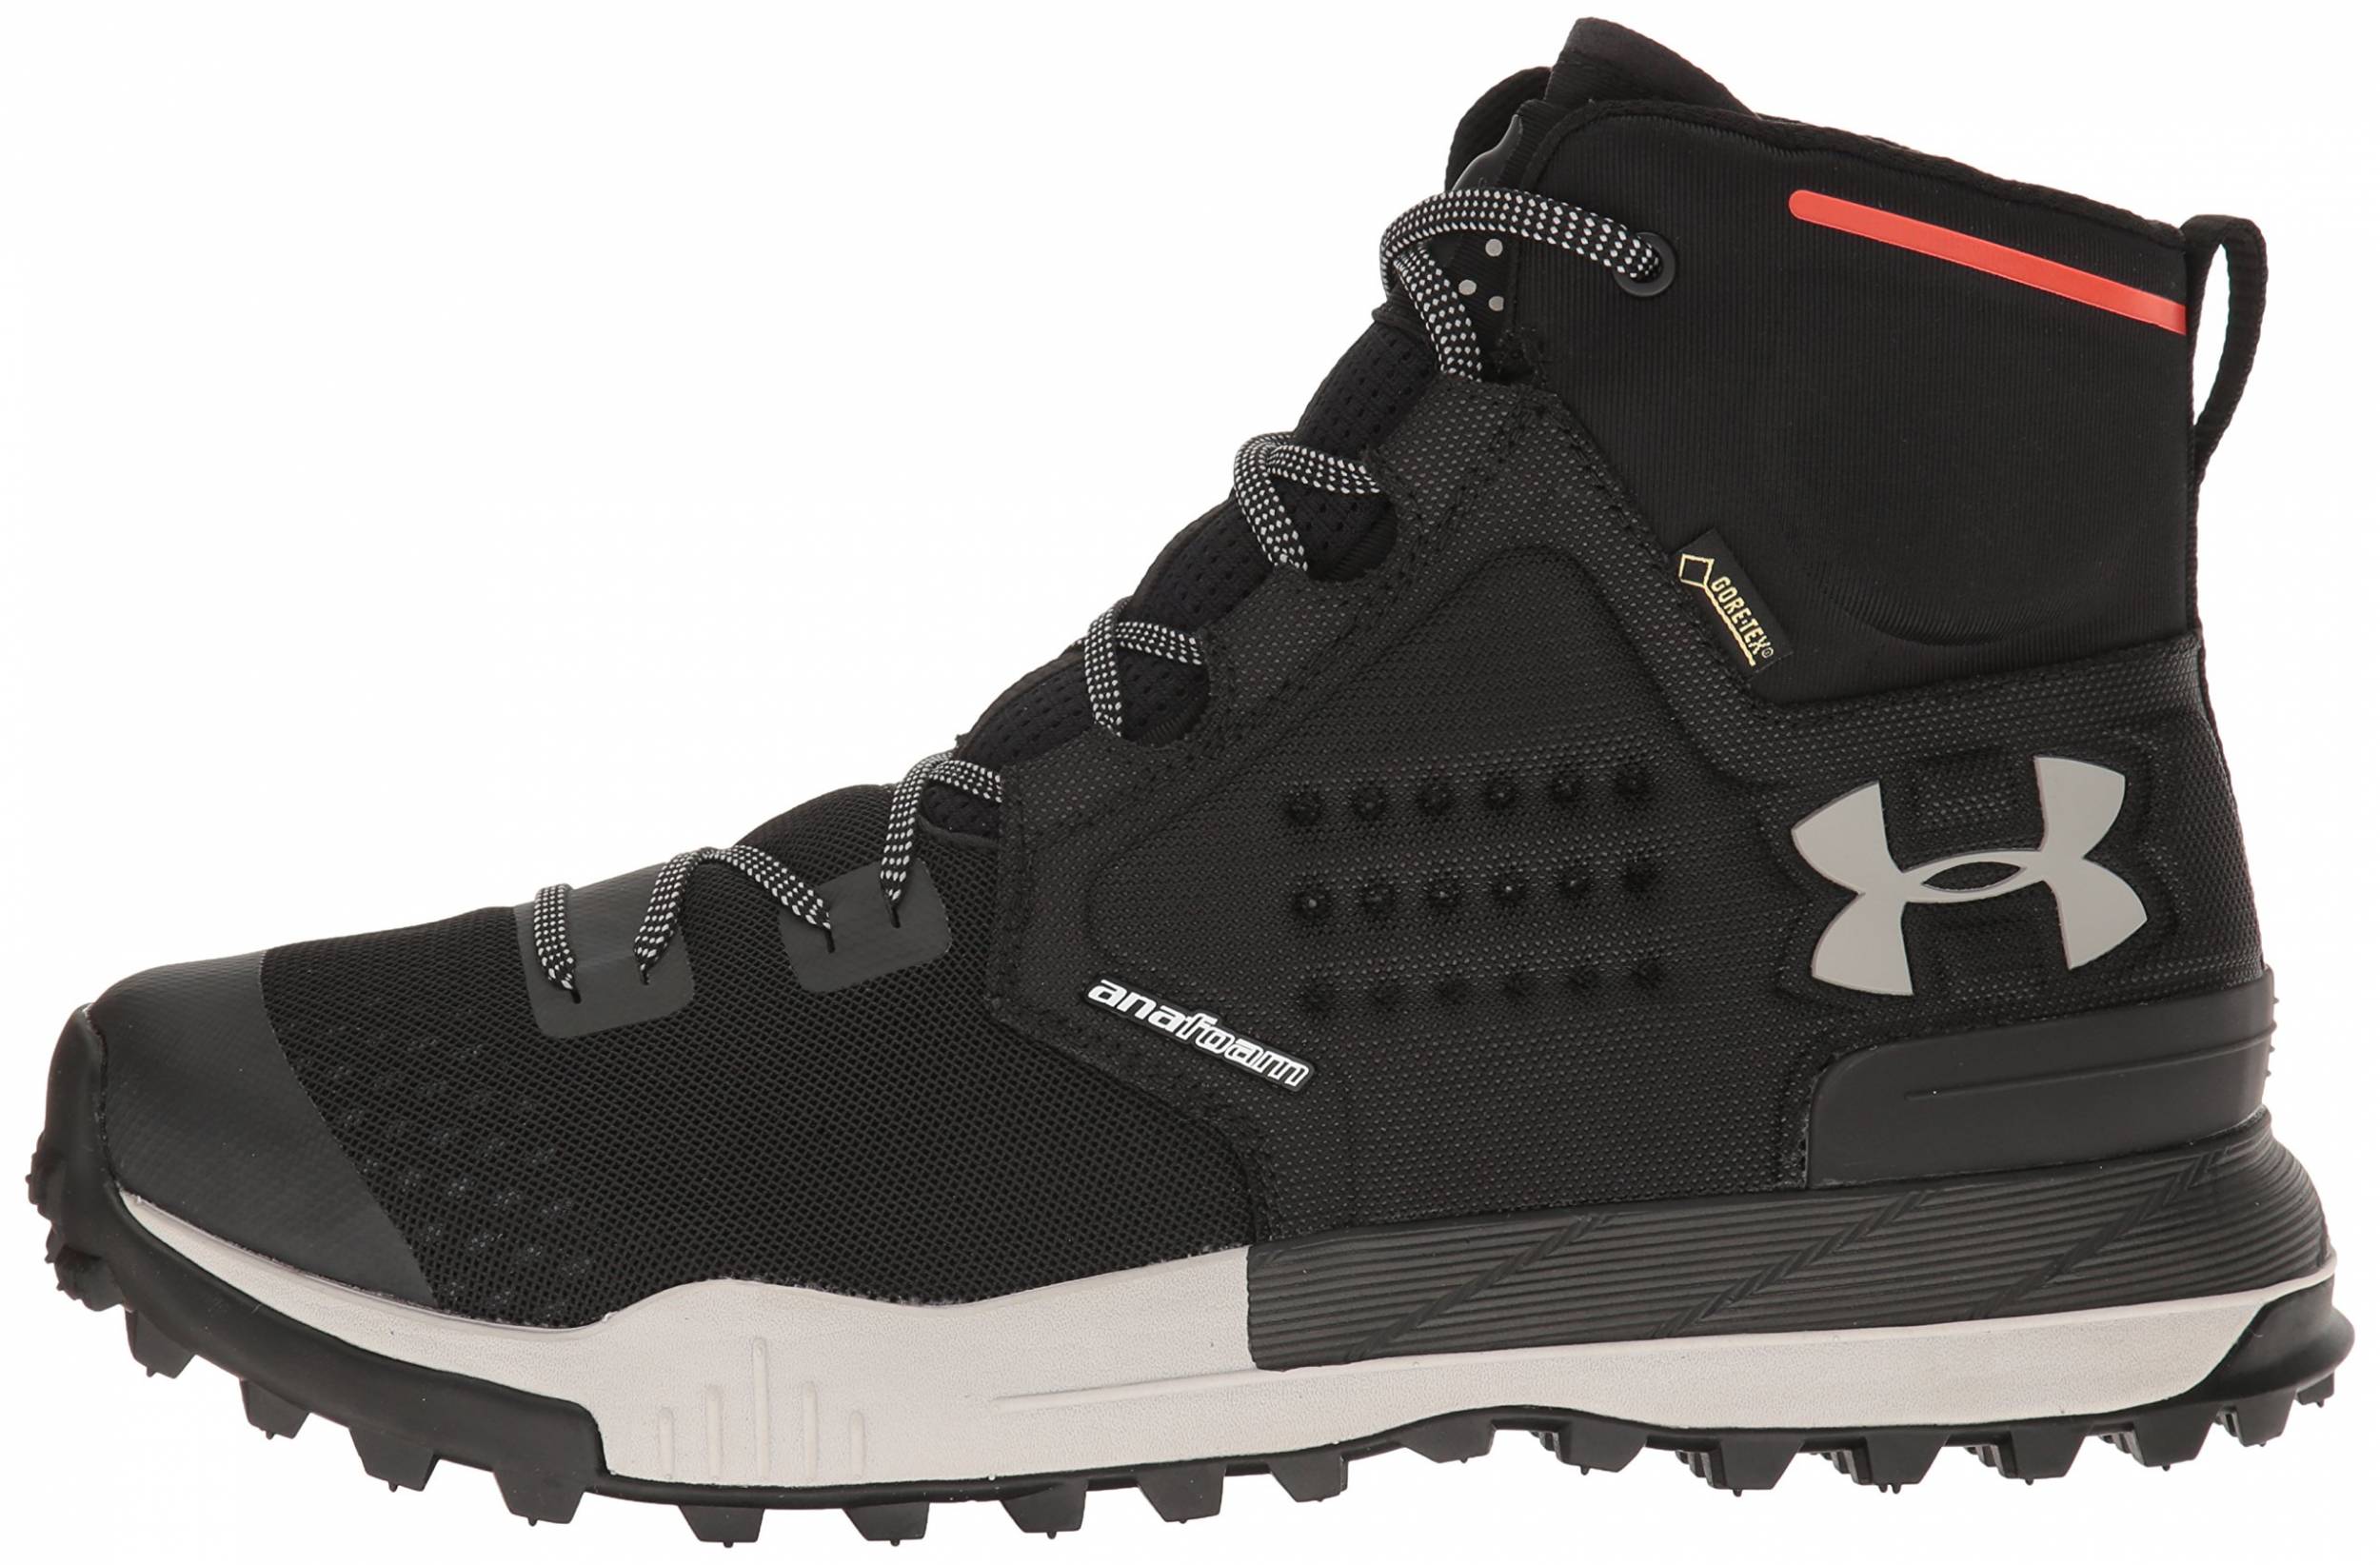 under armour shoes gore tex